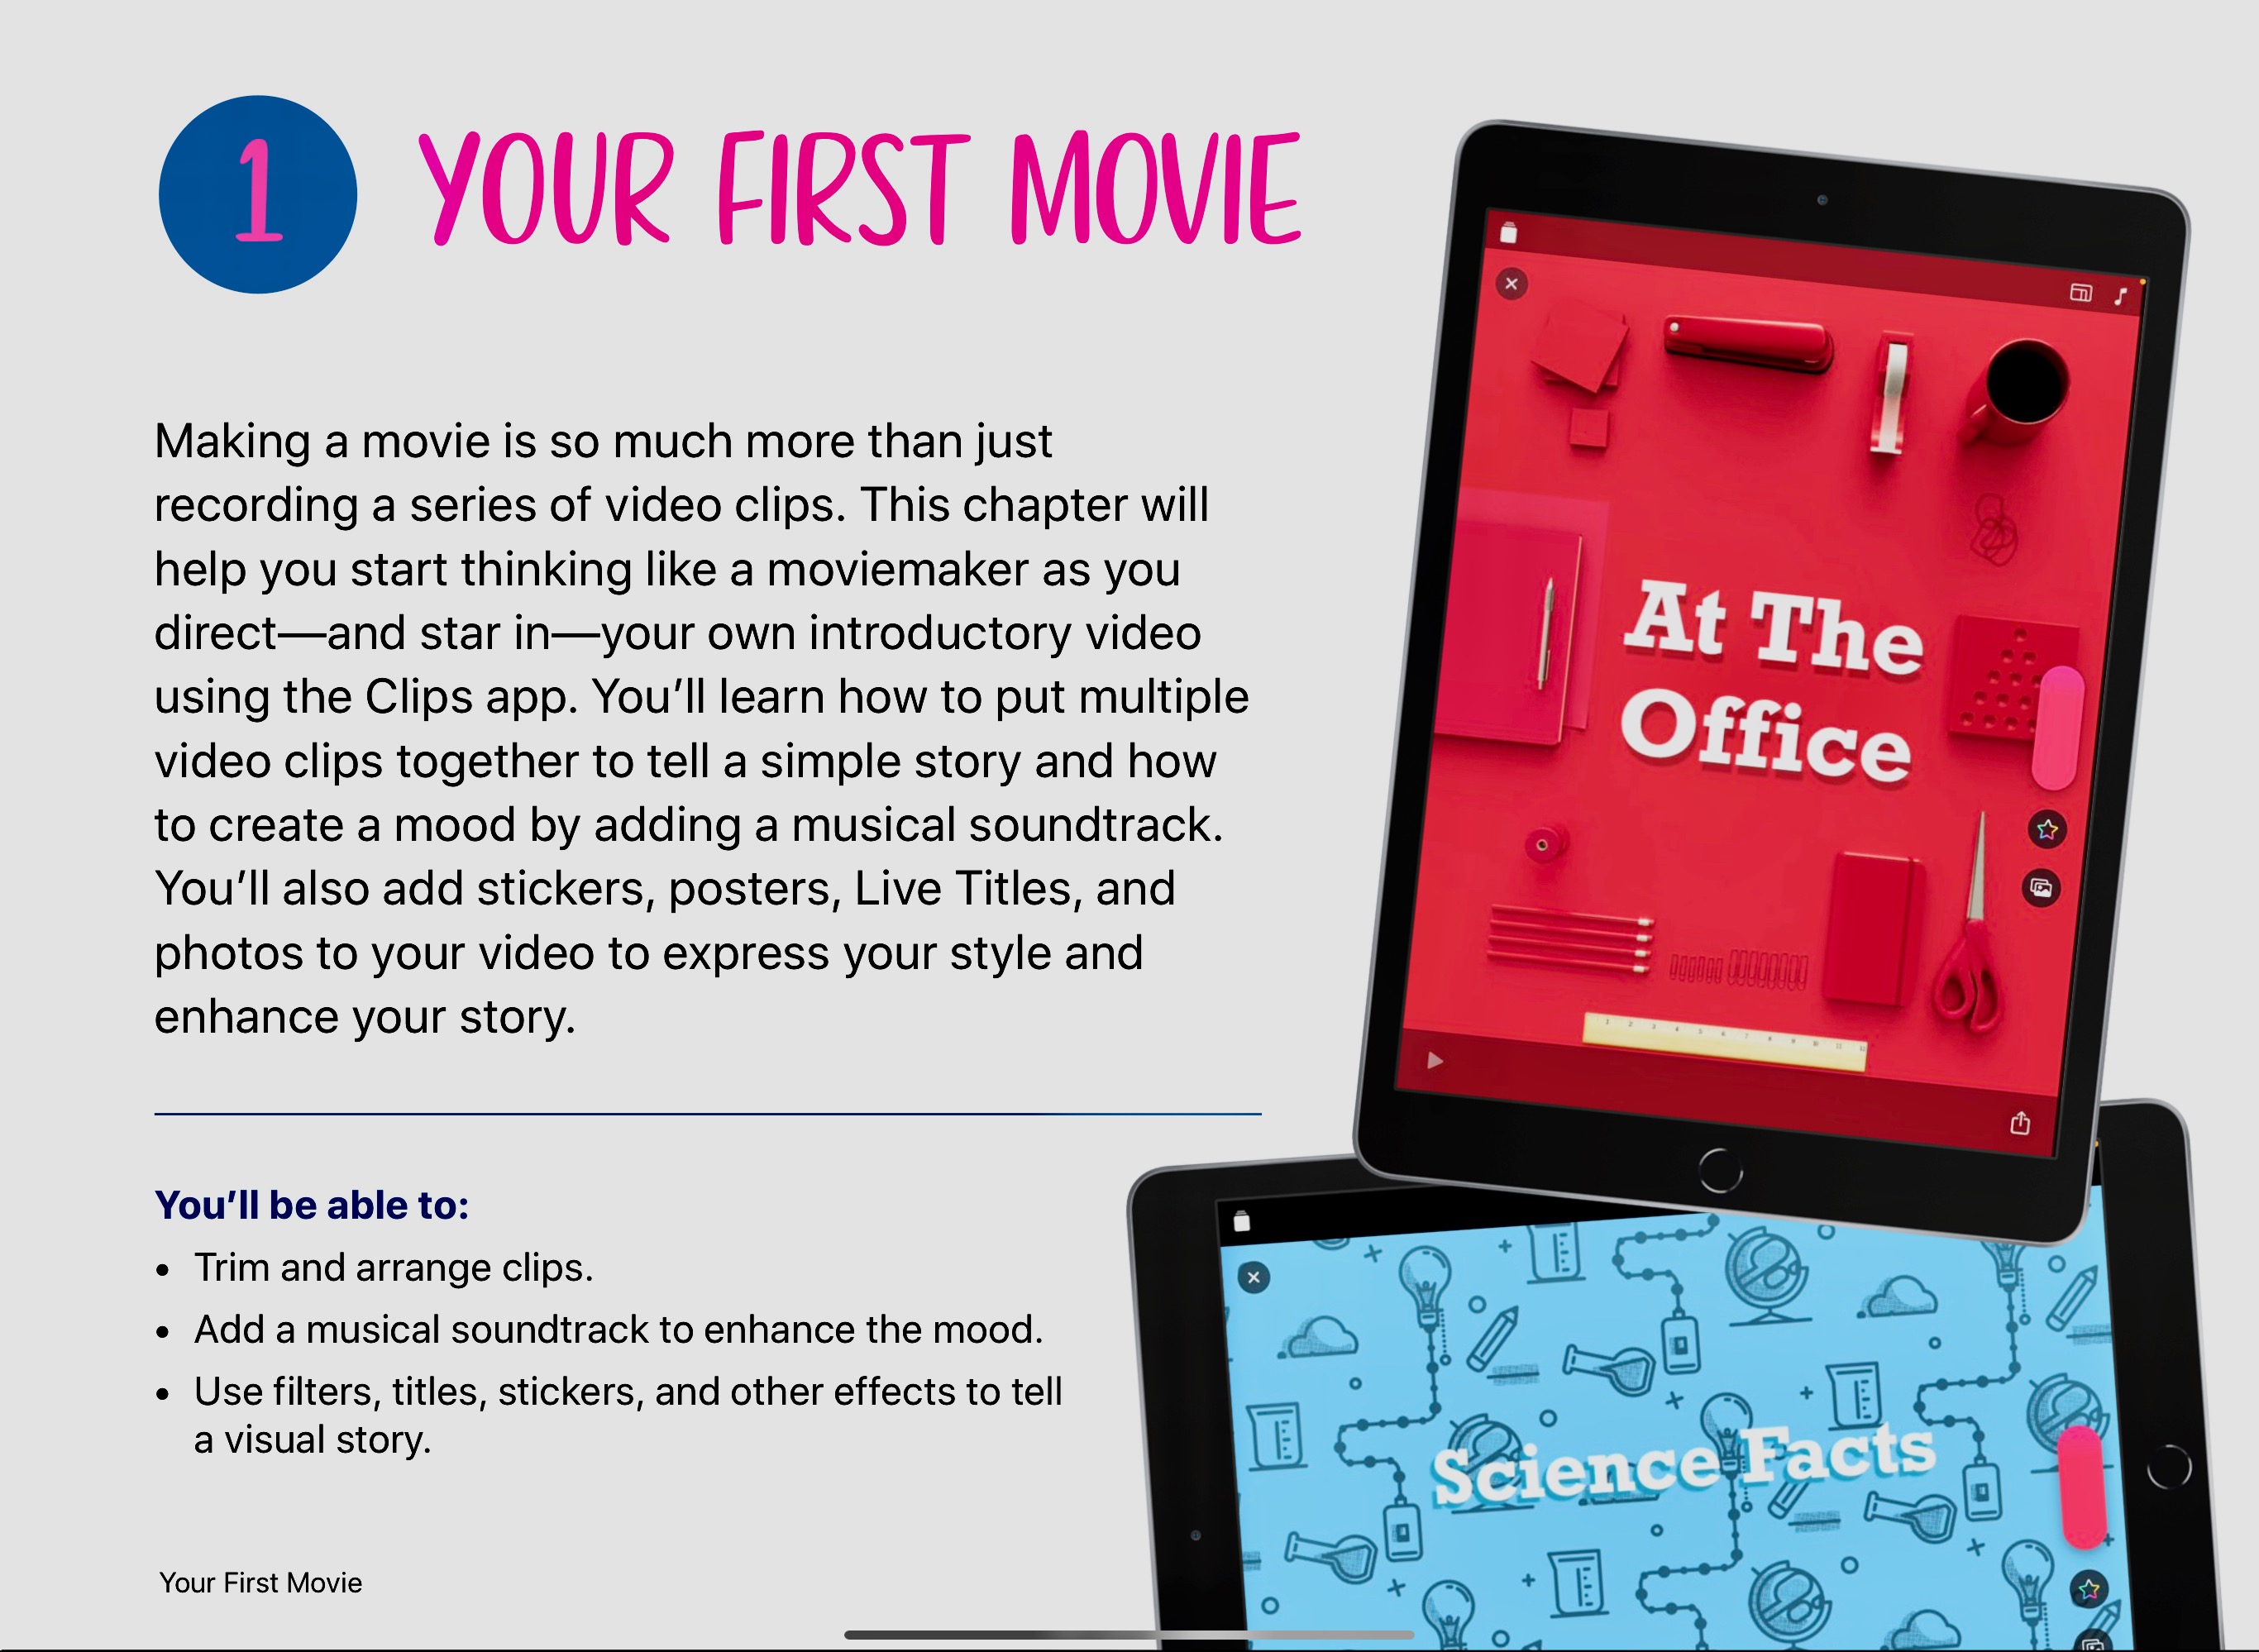 The first page of chapter 1 from the Everyone Can Create: Video book.  The chapter is titled "Your First Movie".